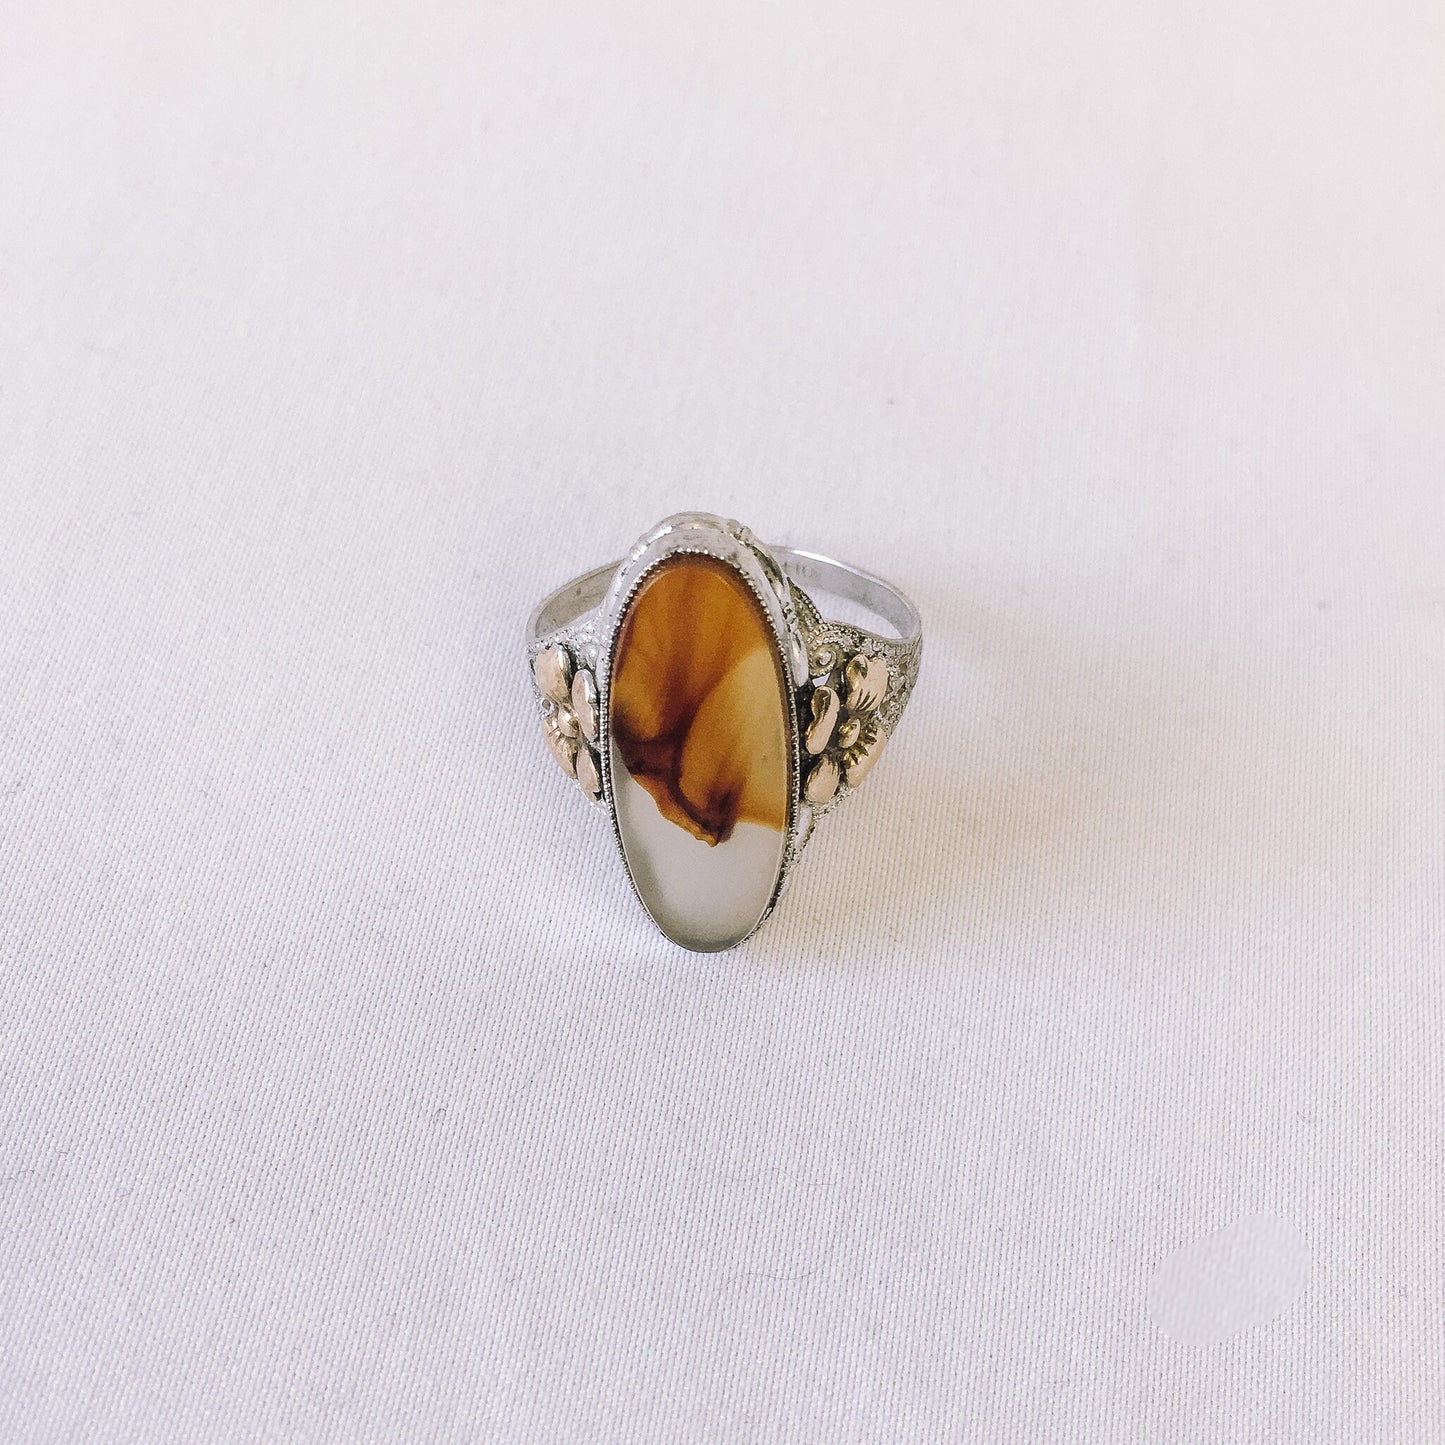 Vintage 10k and Sterling Agate Ring with Floral Accents, 70's Jewelry, Size 8.5-8.75